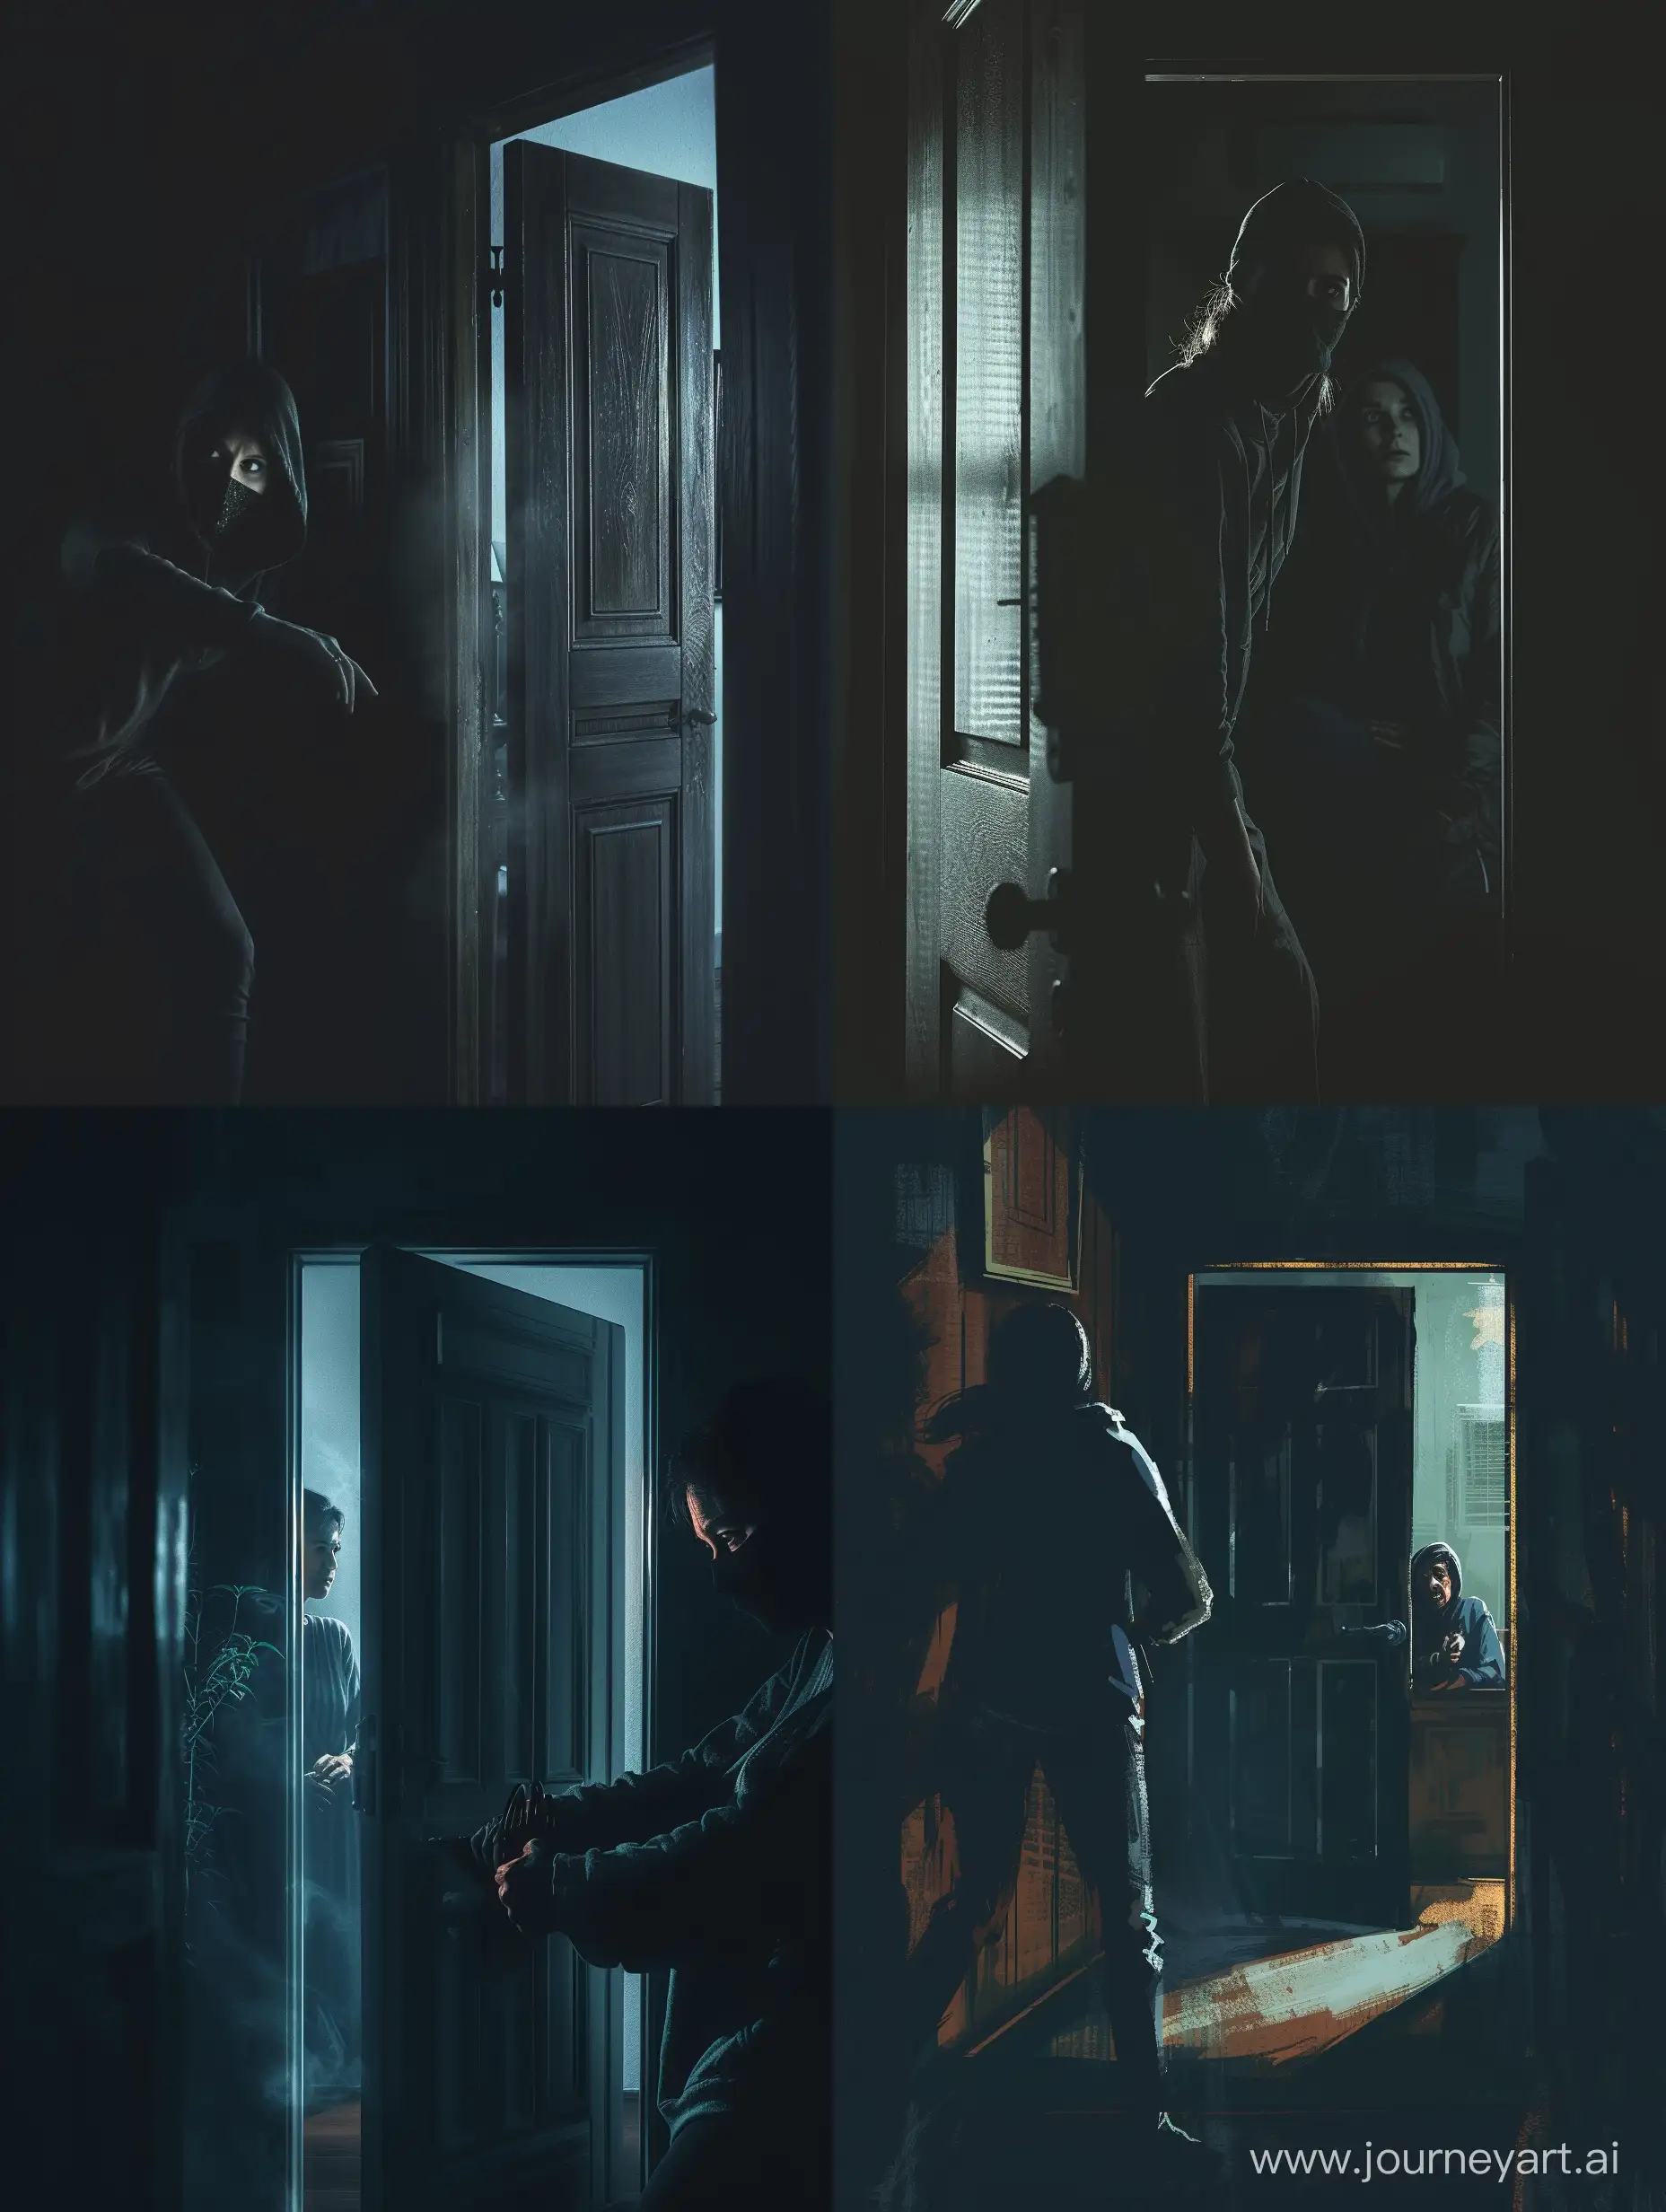 A mysterious thief enters the house of a woman. The thief enters the house with a black mask and apparently searching for something. The woman hides in fear and worry behind a door and somehow attempts not to patch a thief. The dark room, with only a silent light, highlights this scene.